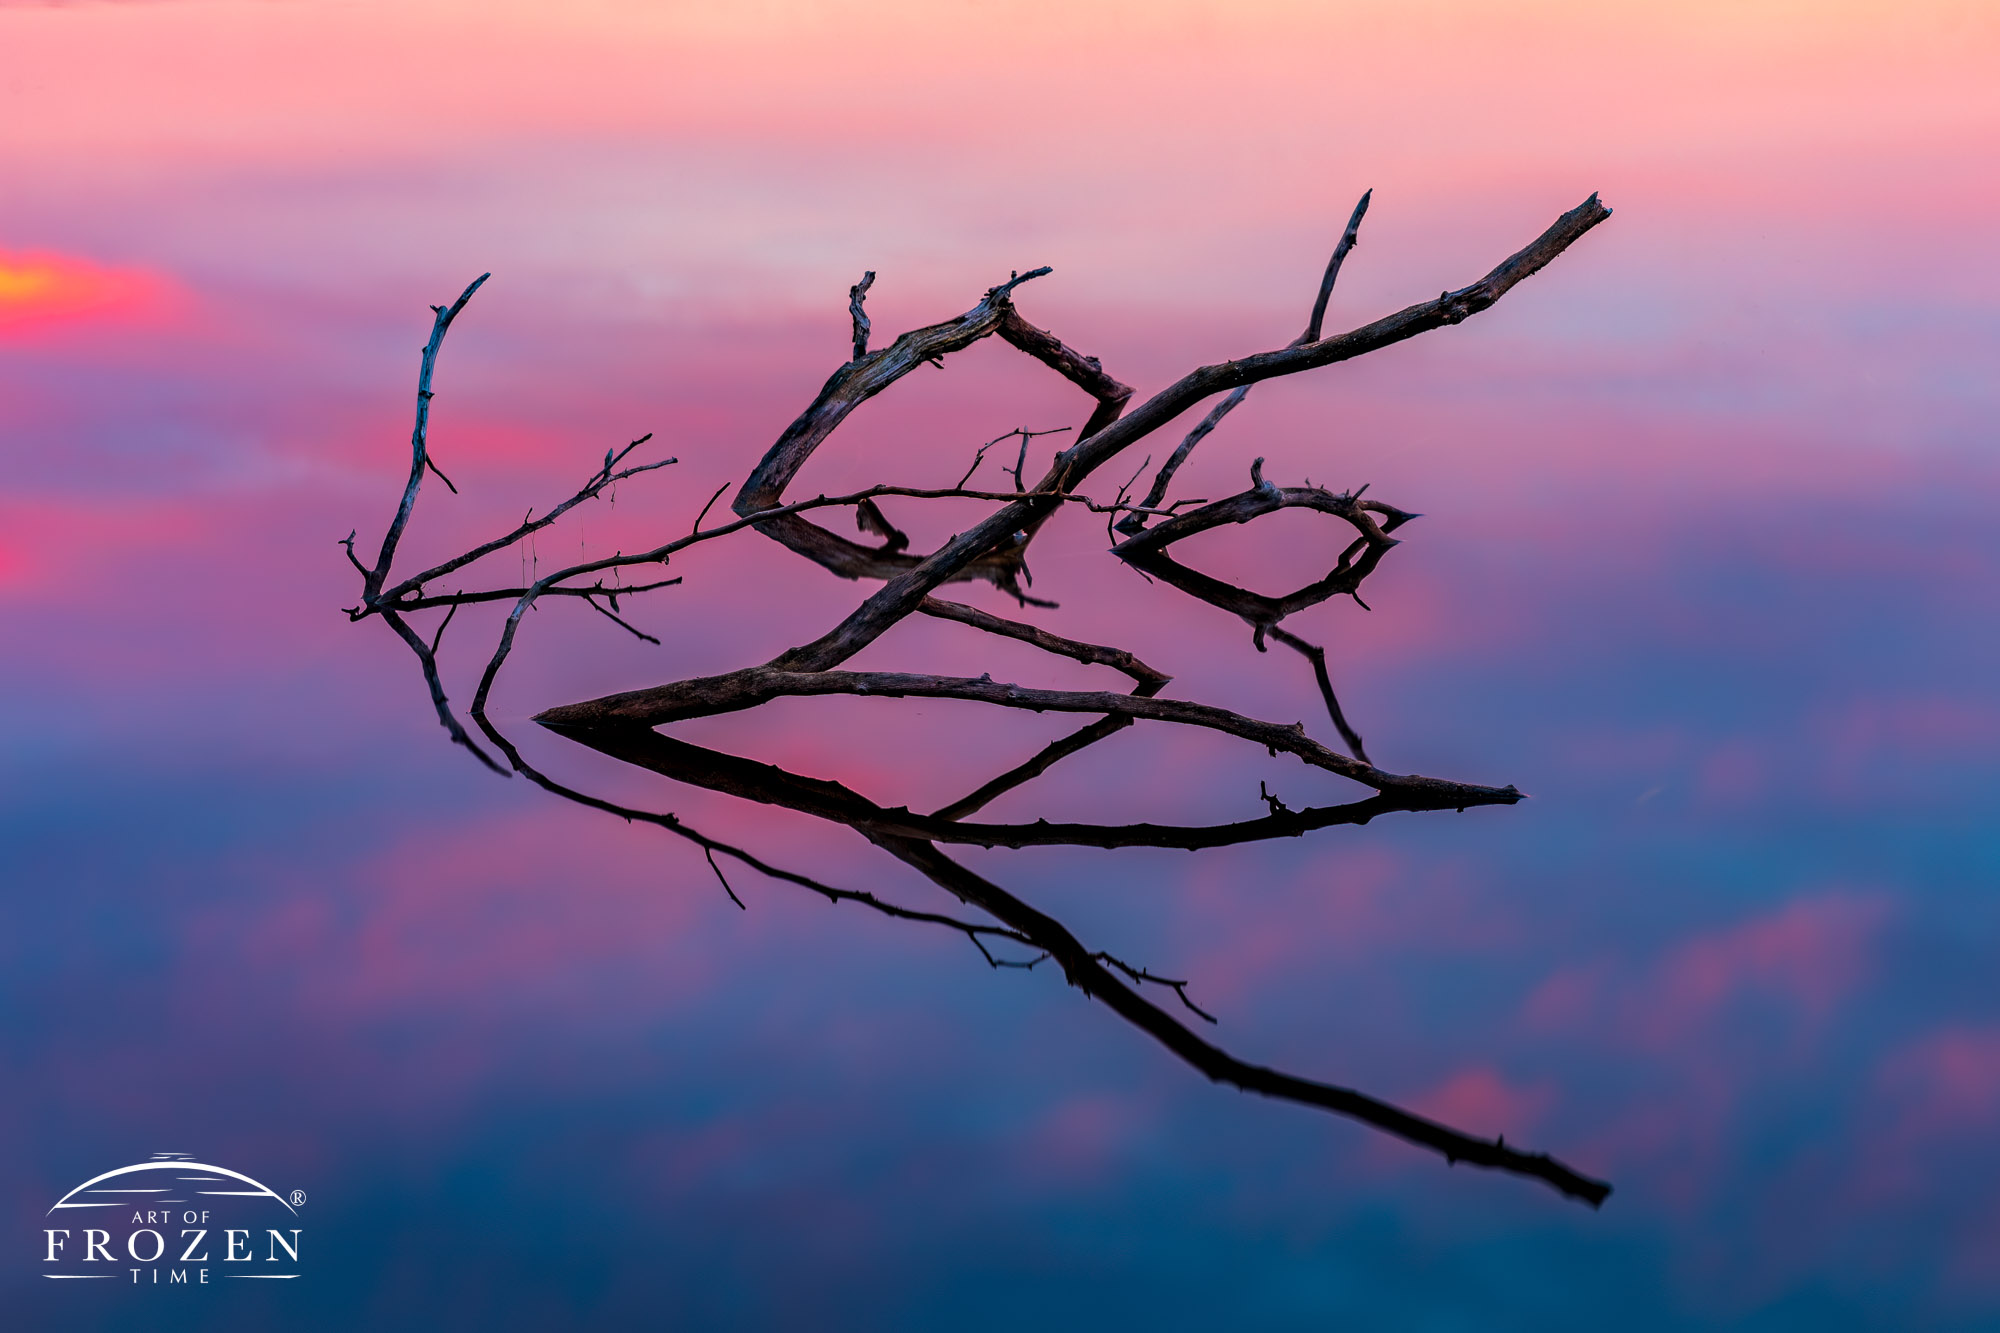 Ohio Fine Art Photography where a submerged tree's branches create interesting silhouettes and composition during a fiery sunrise.